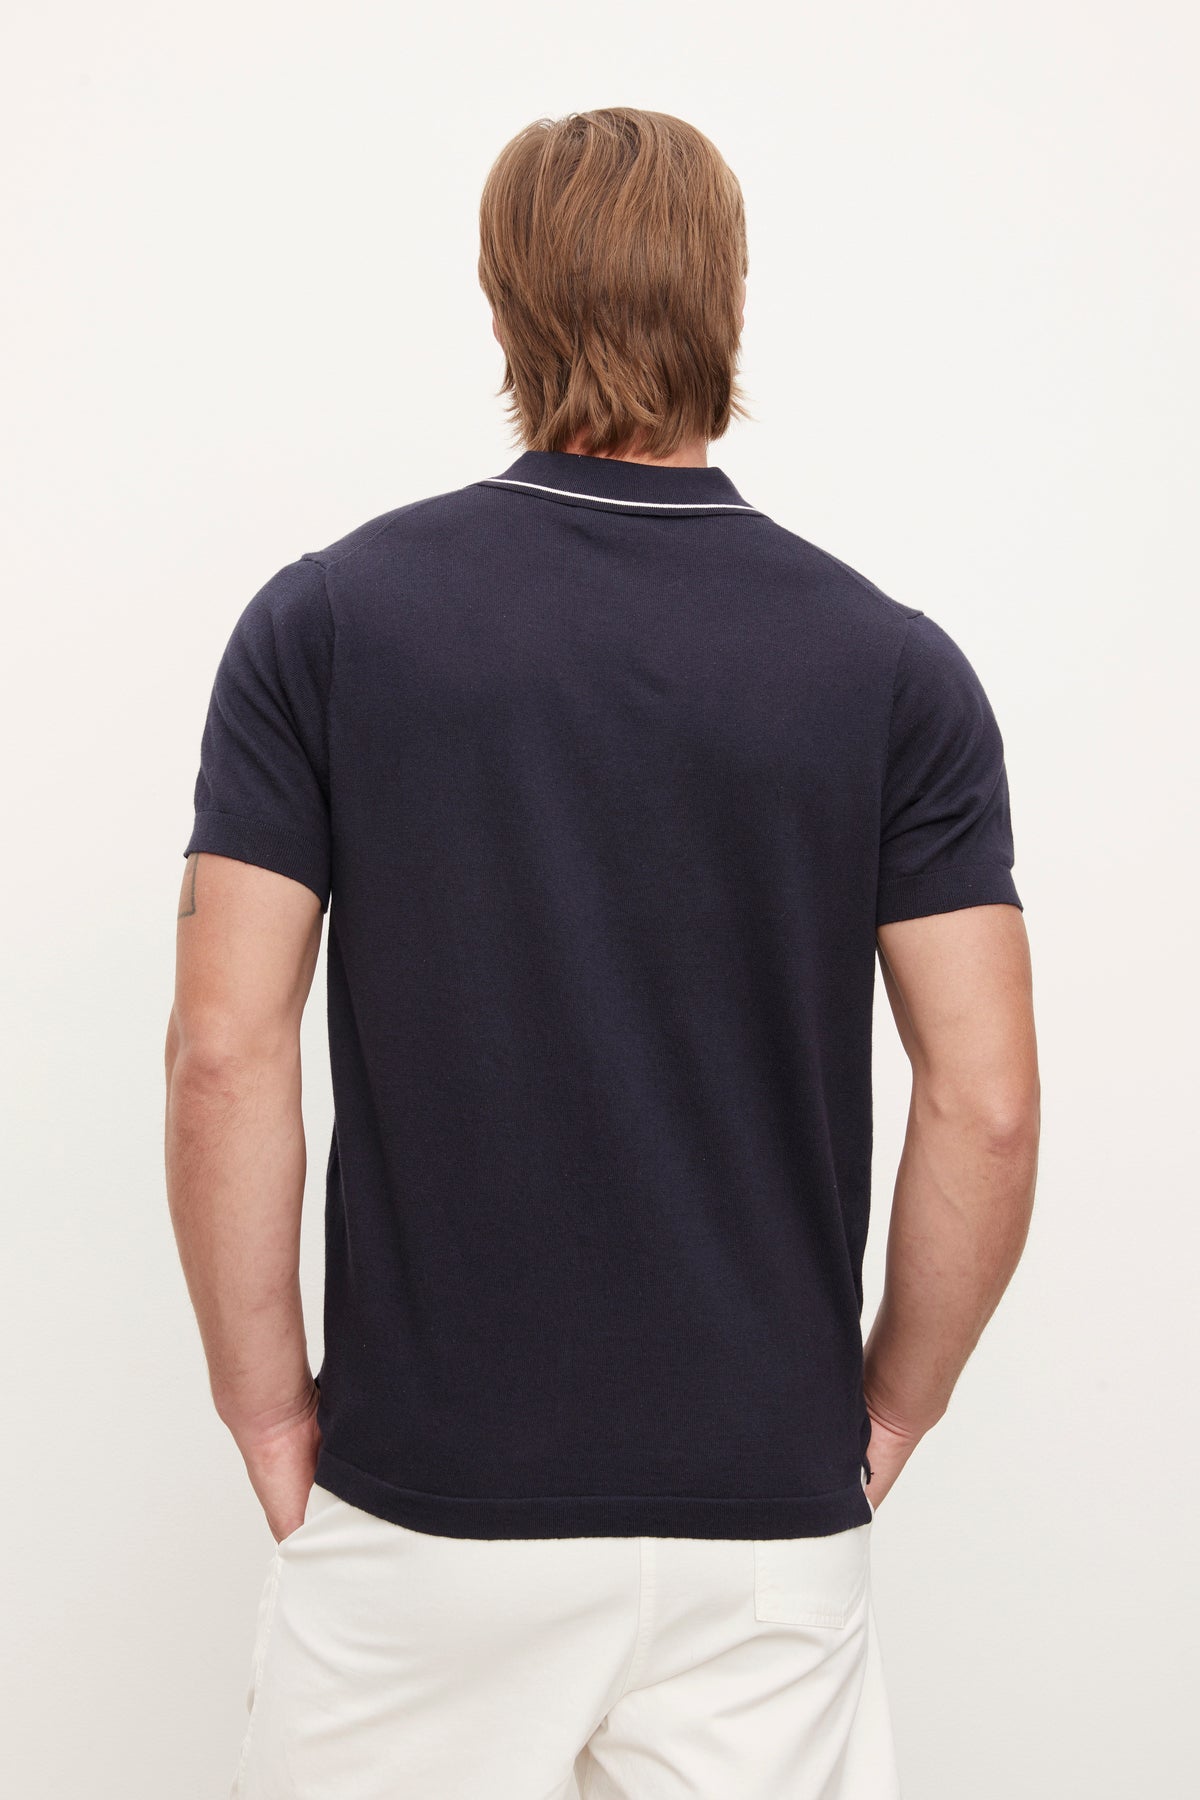 Man wearing a Velvet by Graham & Spencer Shepard Polo shirt in navy blue and white pants, standing with his back to the camera, against a white background.-36753534812353